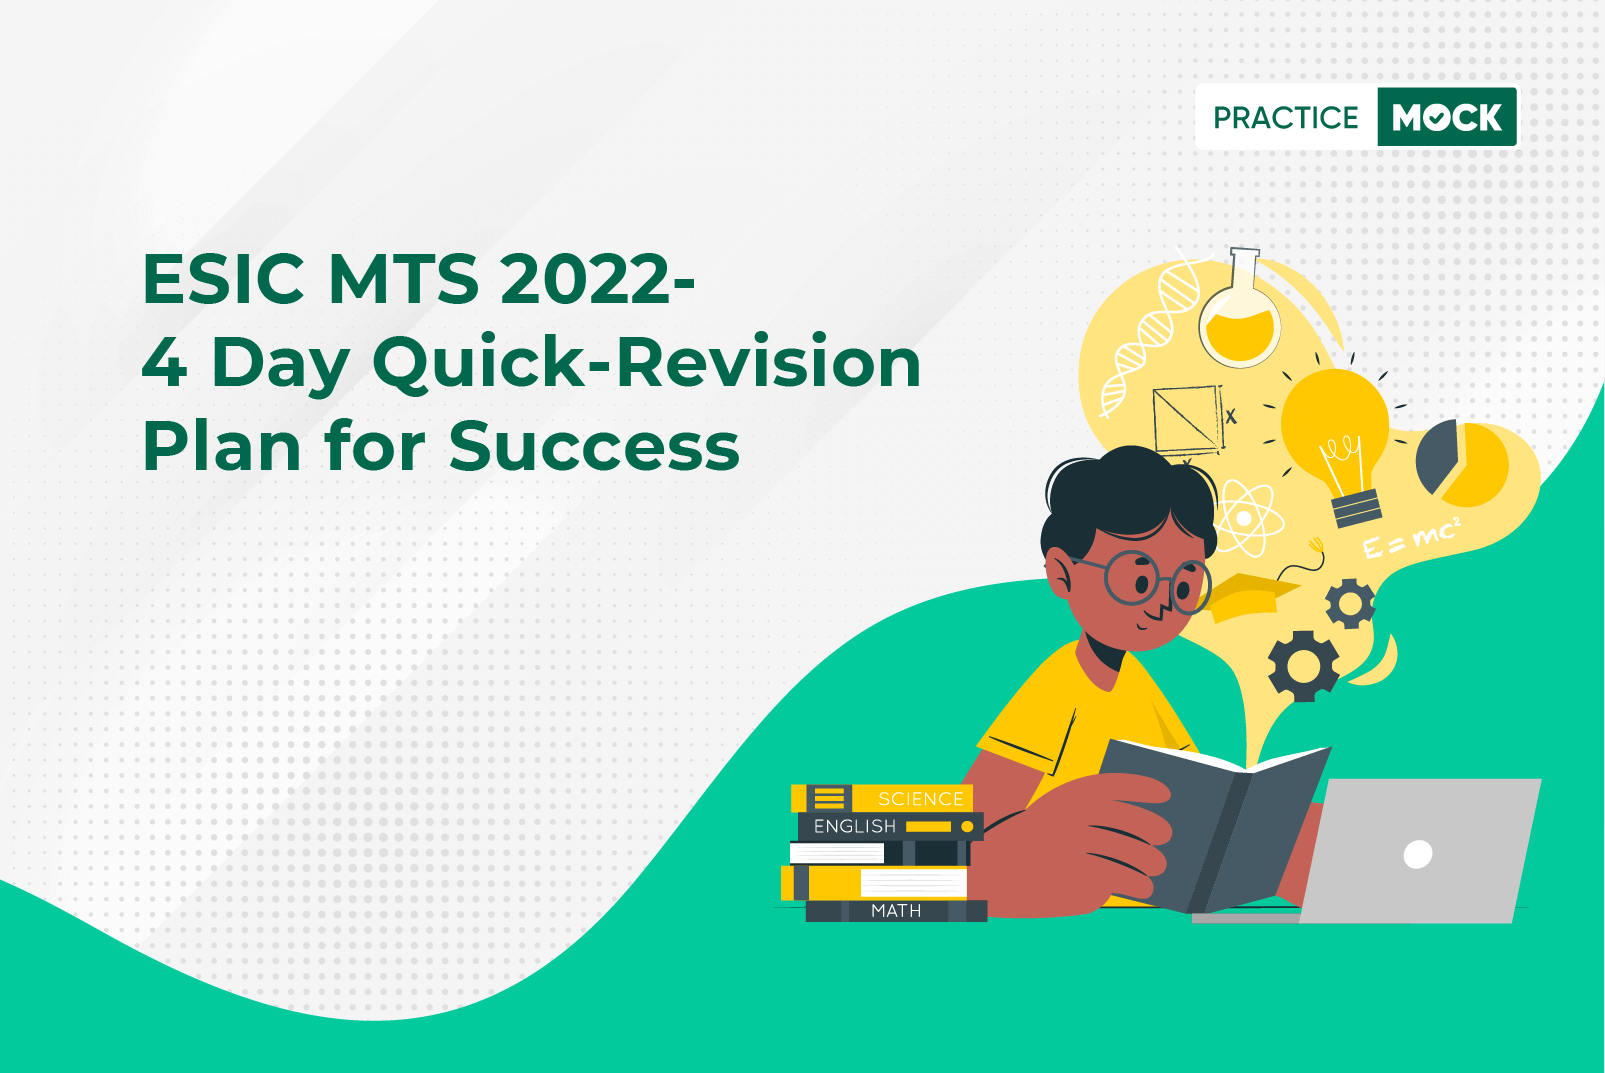 ESIC MTS 2022-4 Day Quick-Revision Plan for Success